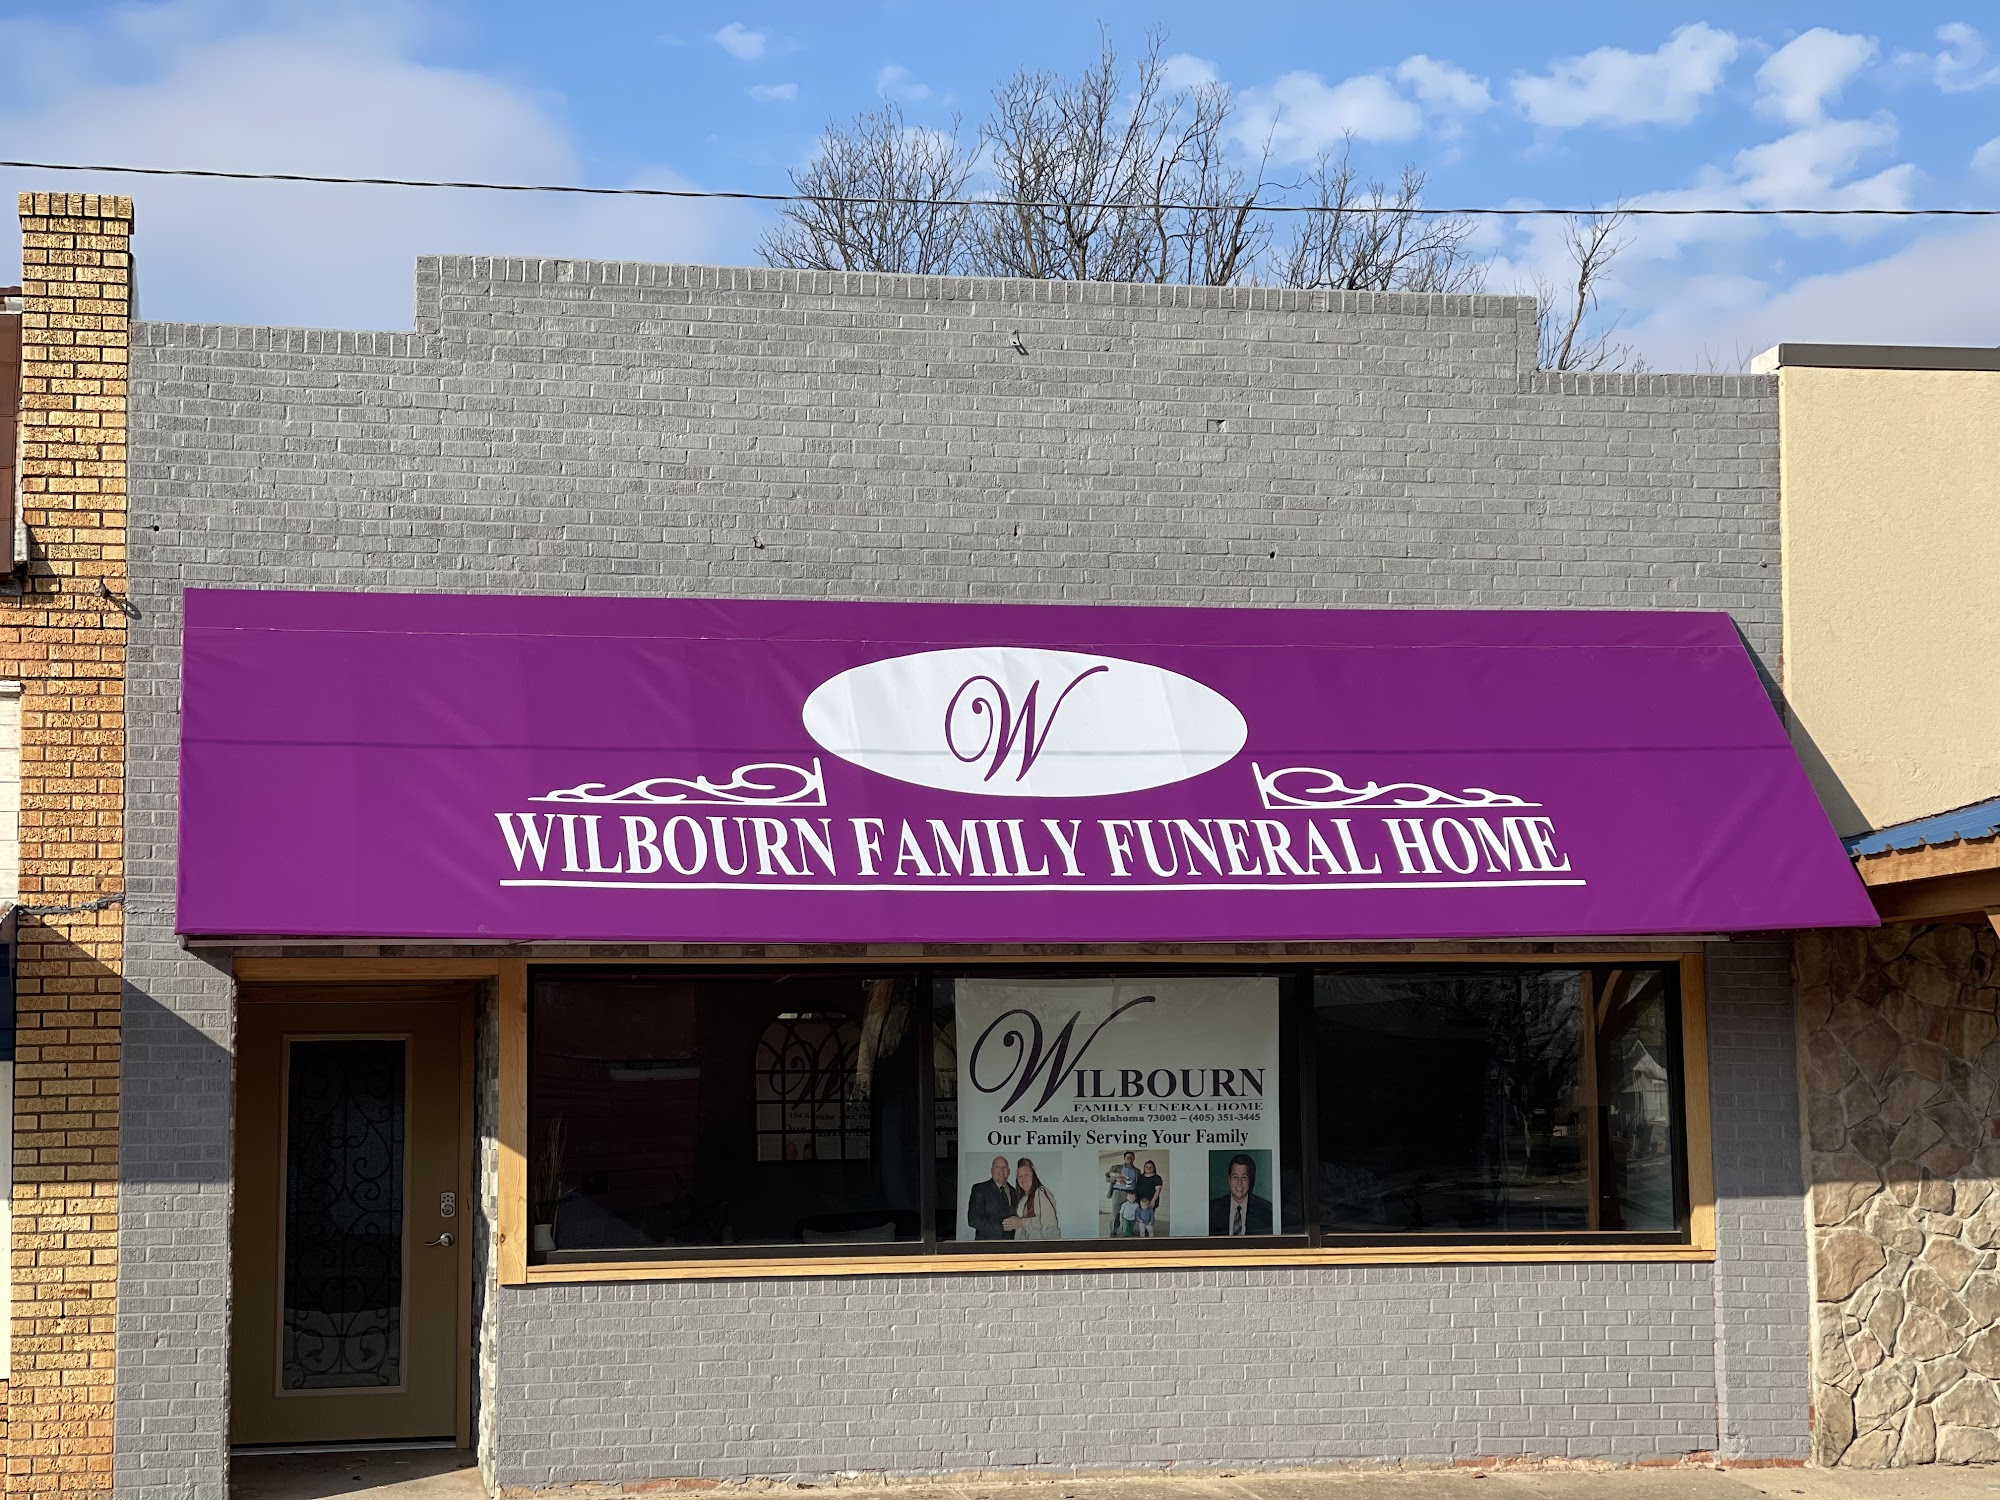 Wilbourn Family Funeral Home